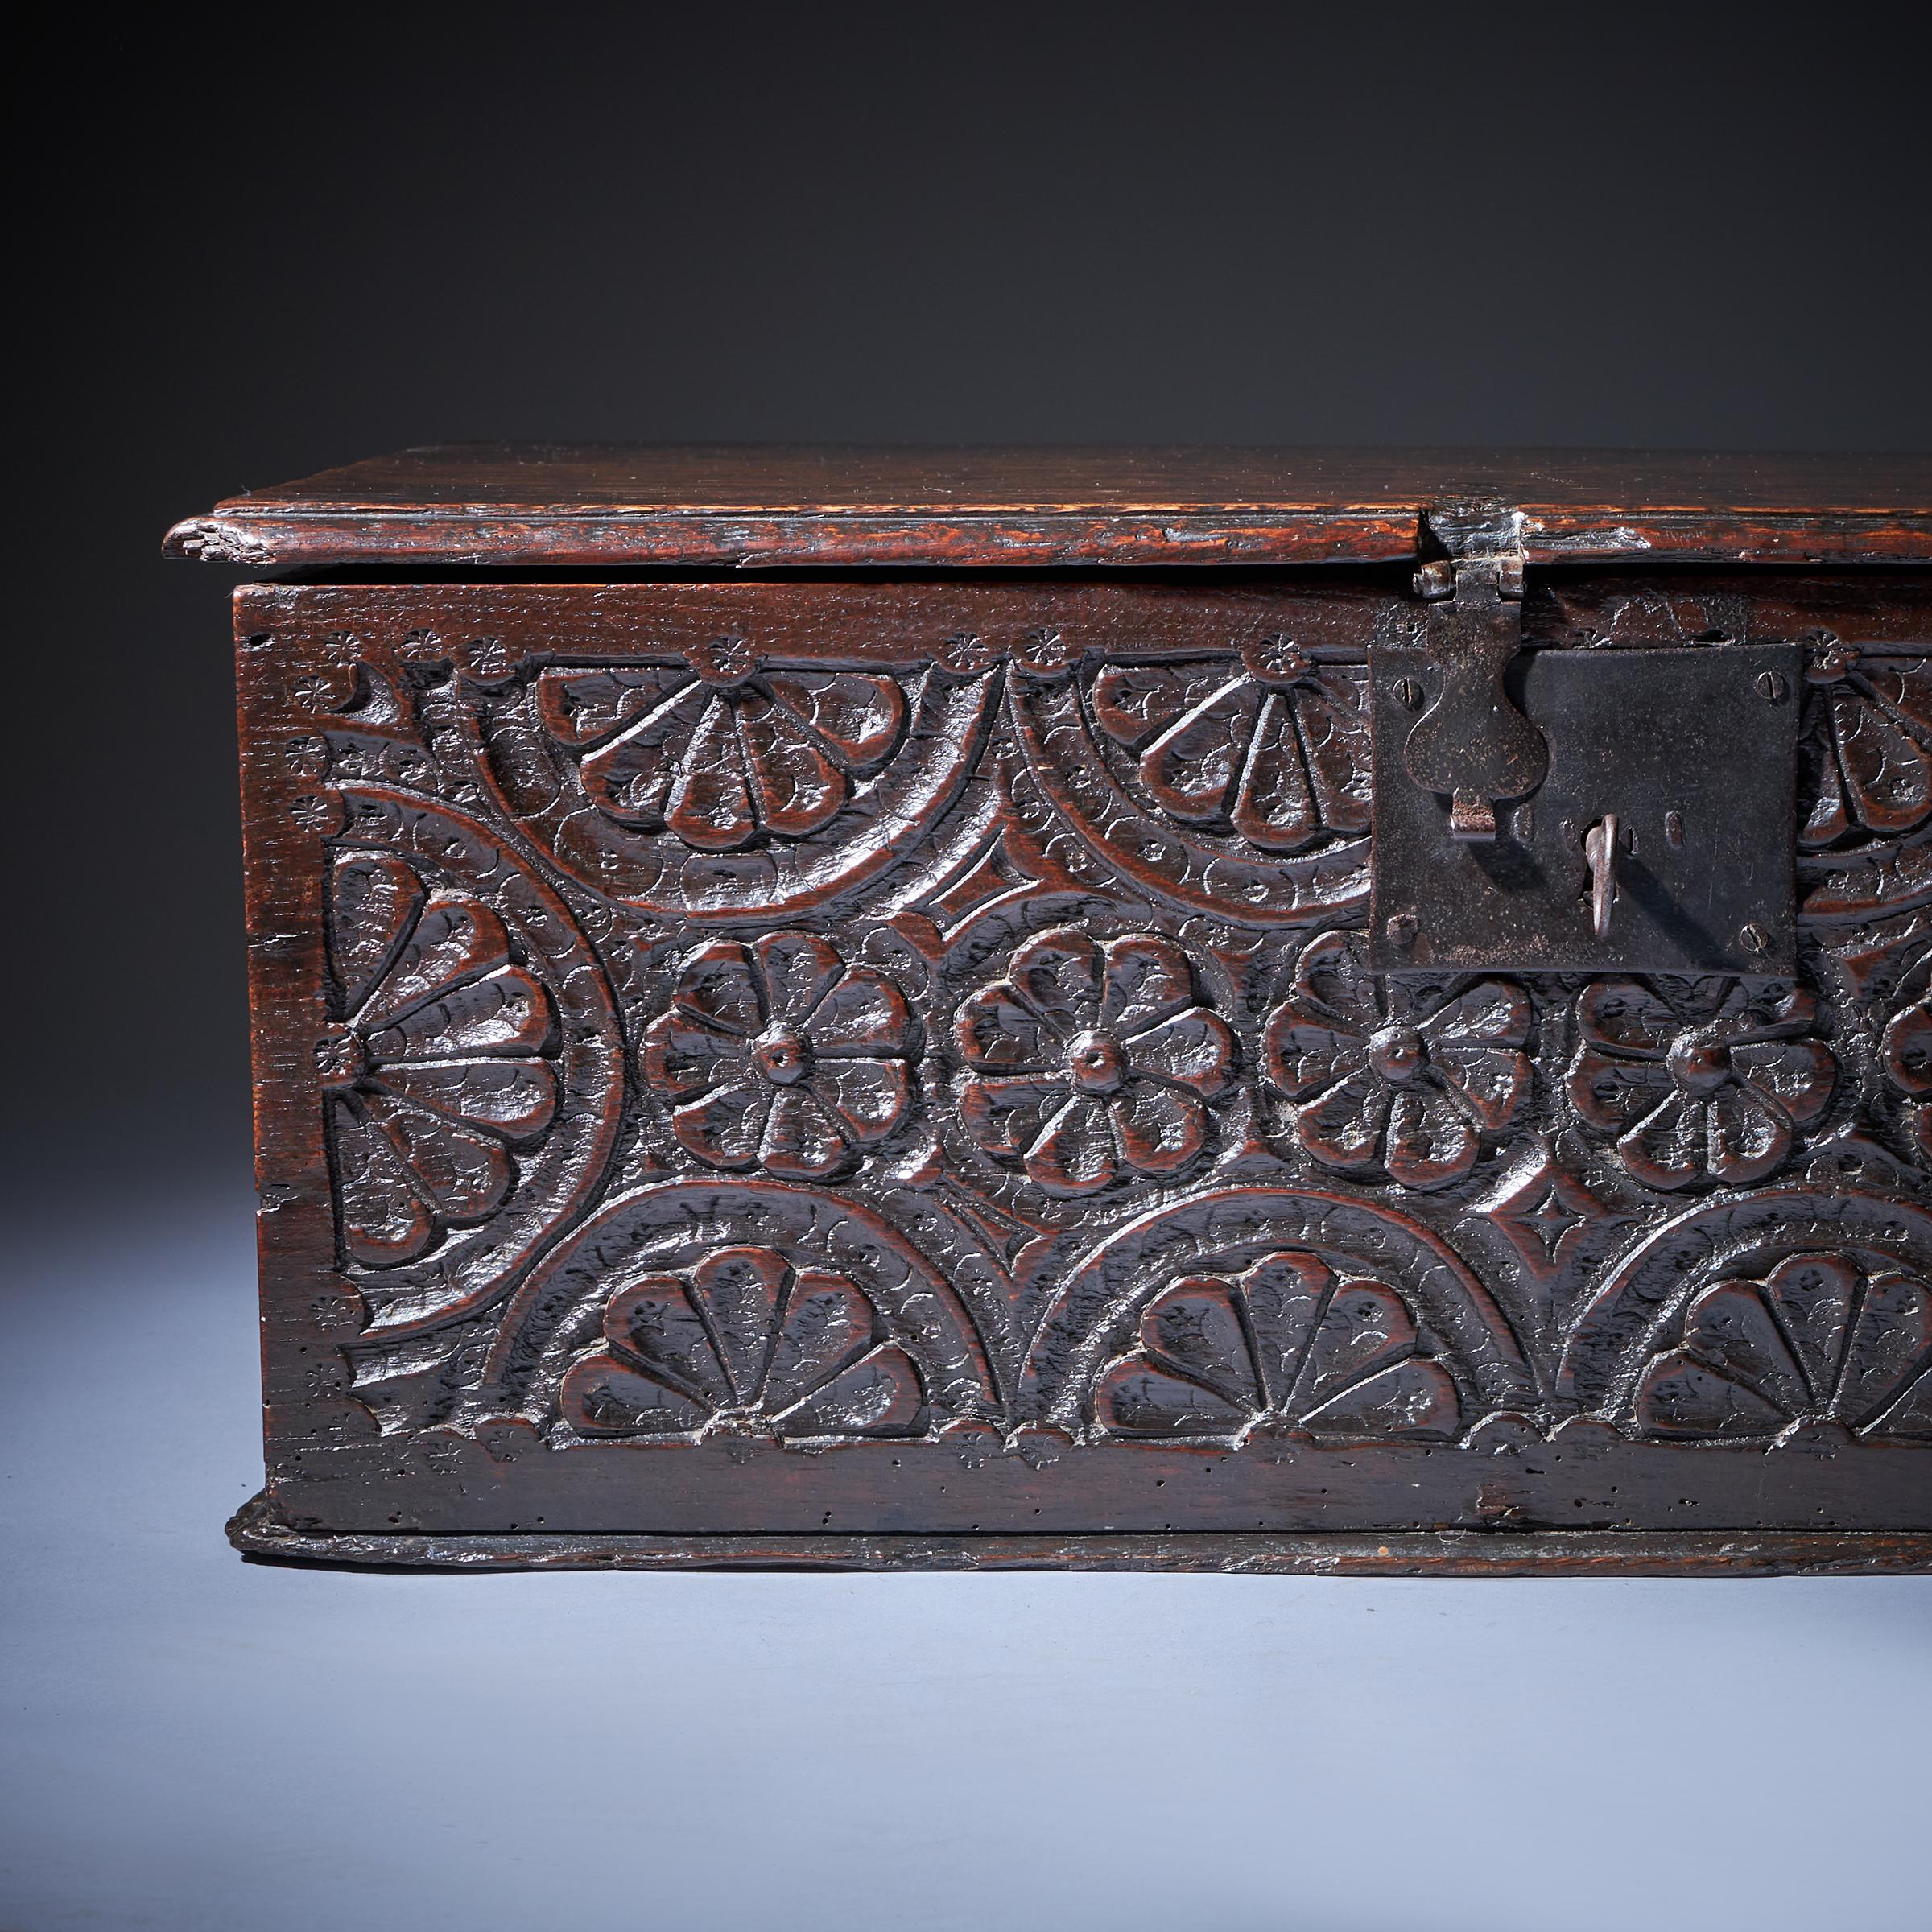 17th Century Charles I Carved Oak Box with Original Iron Clasp and Staple Lock In Good Condition For Sale In Oxfordshire, United Kingdom